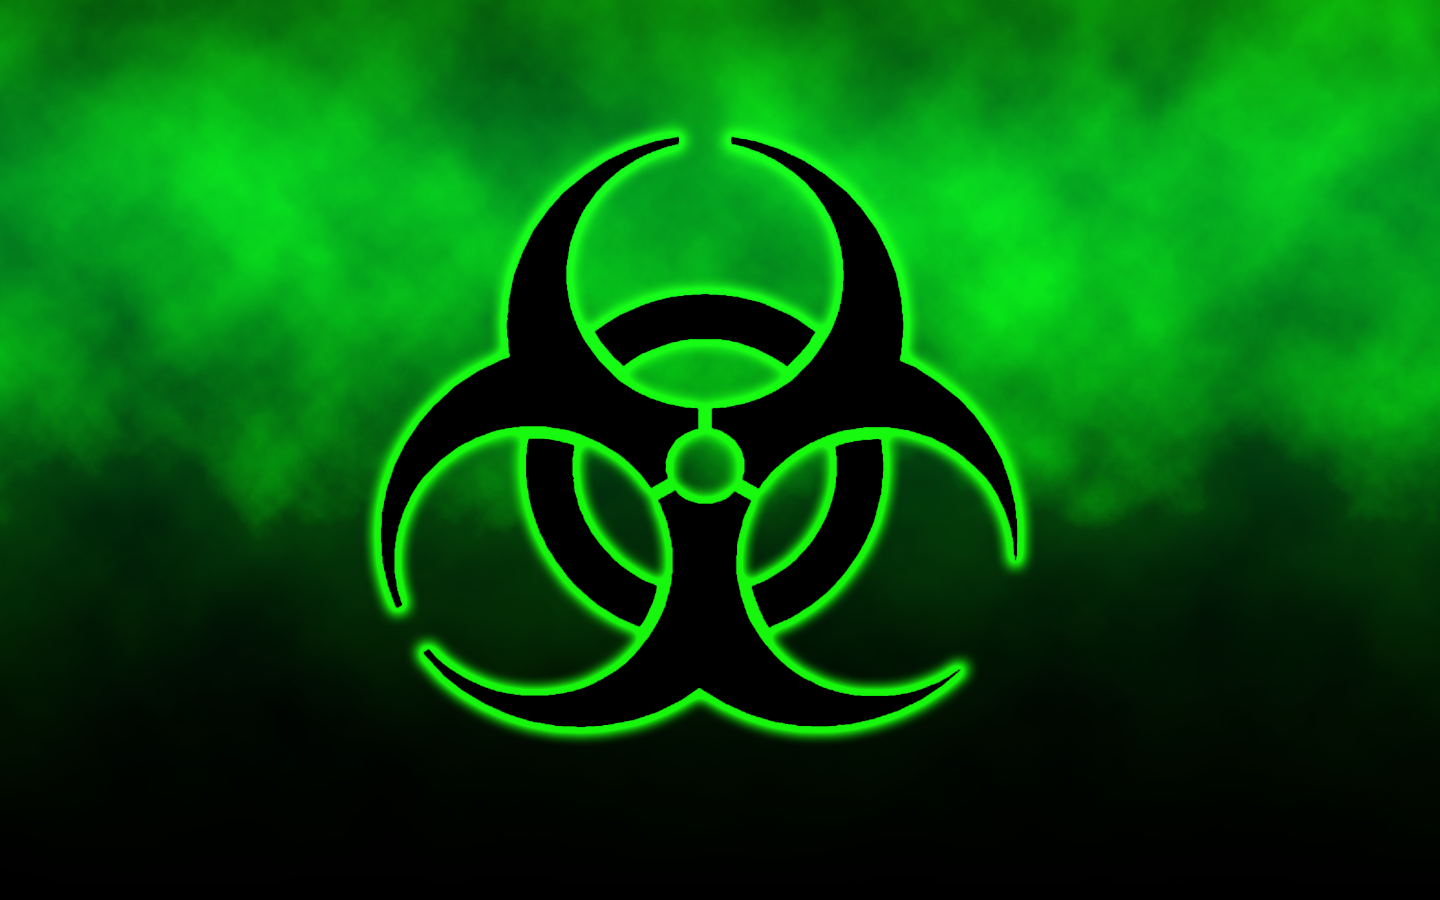 Boihazard Green Biohazard Symbol Abstract And HD Wallpaper Pictures